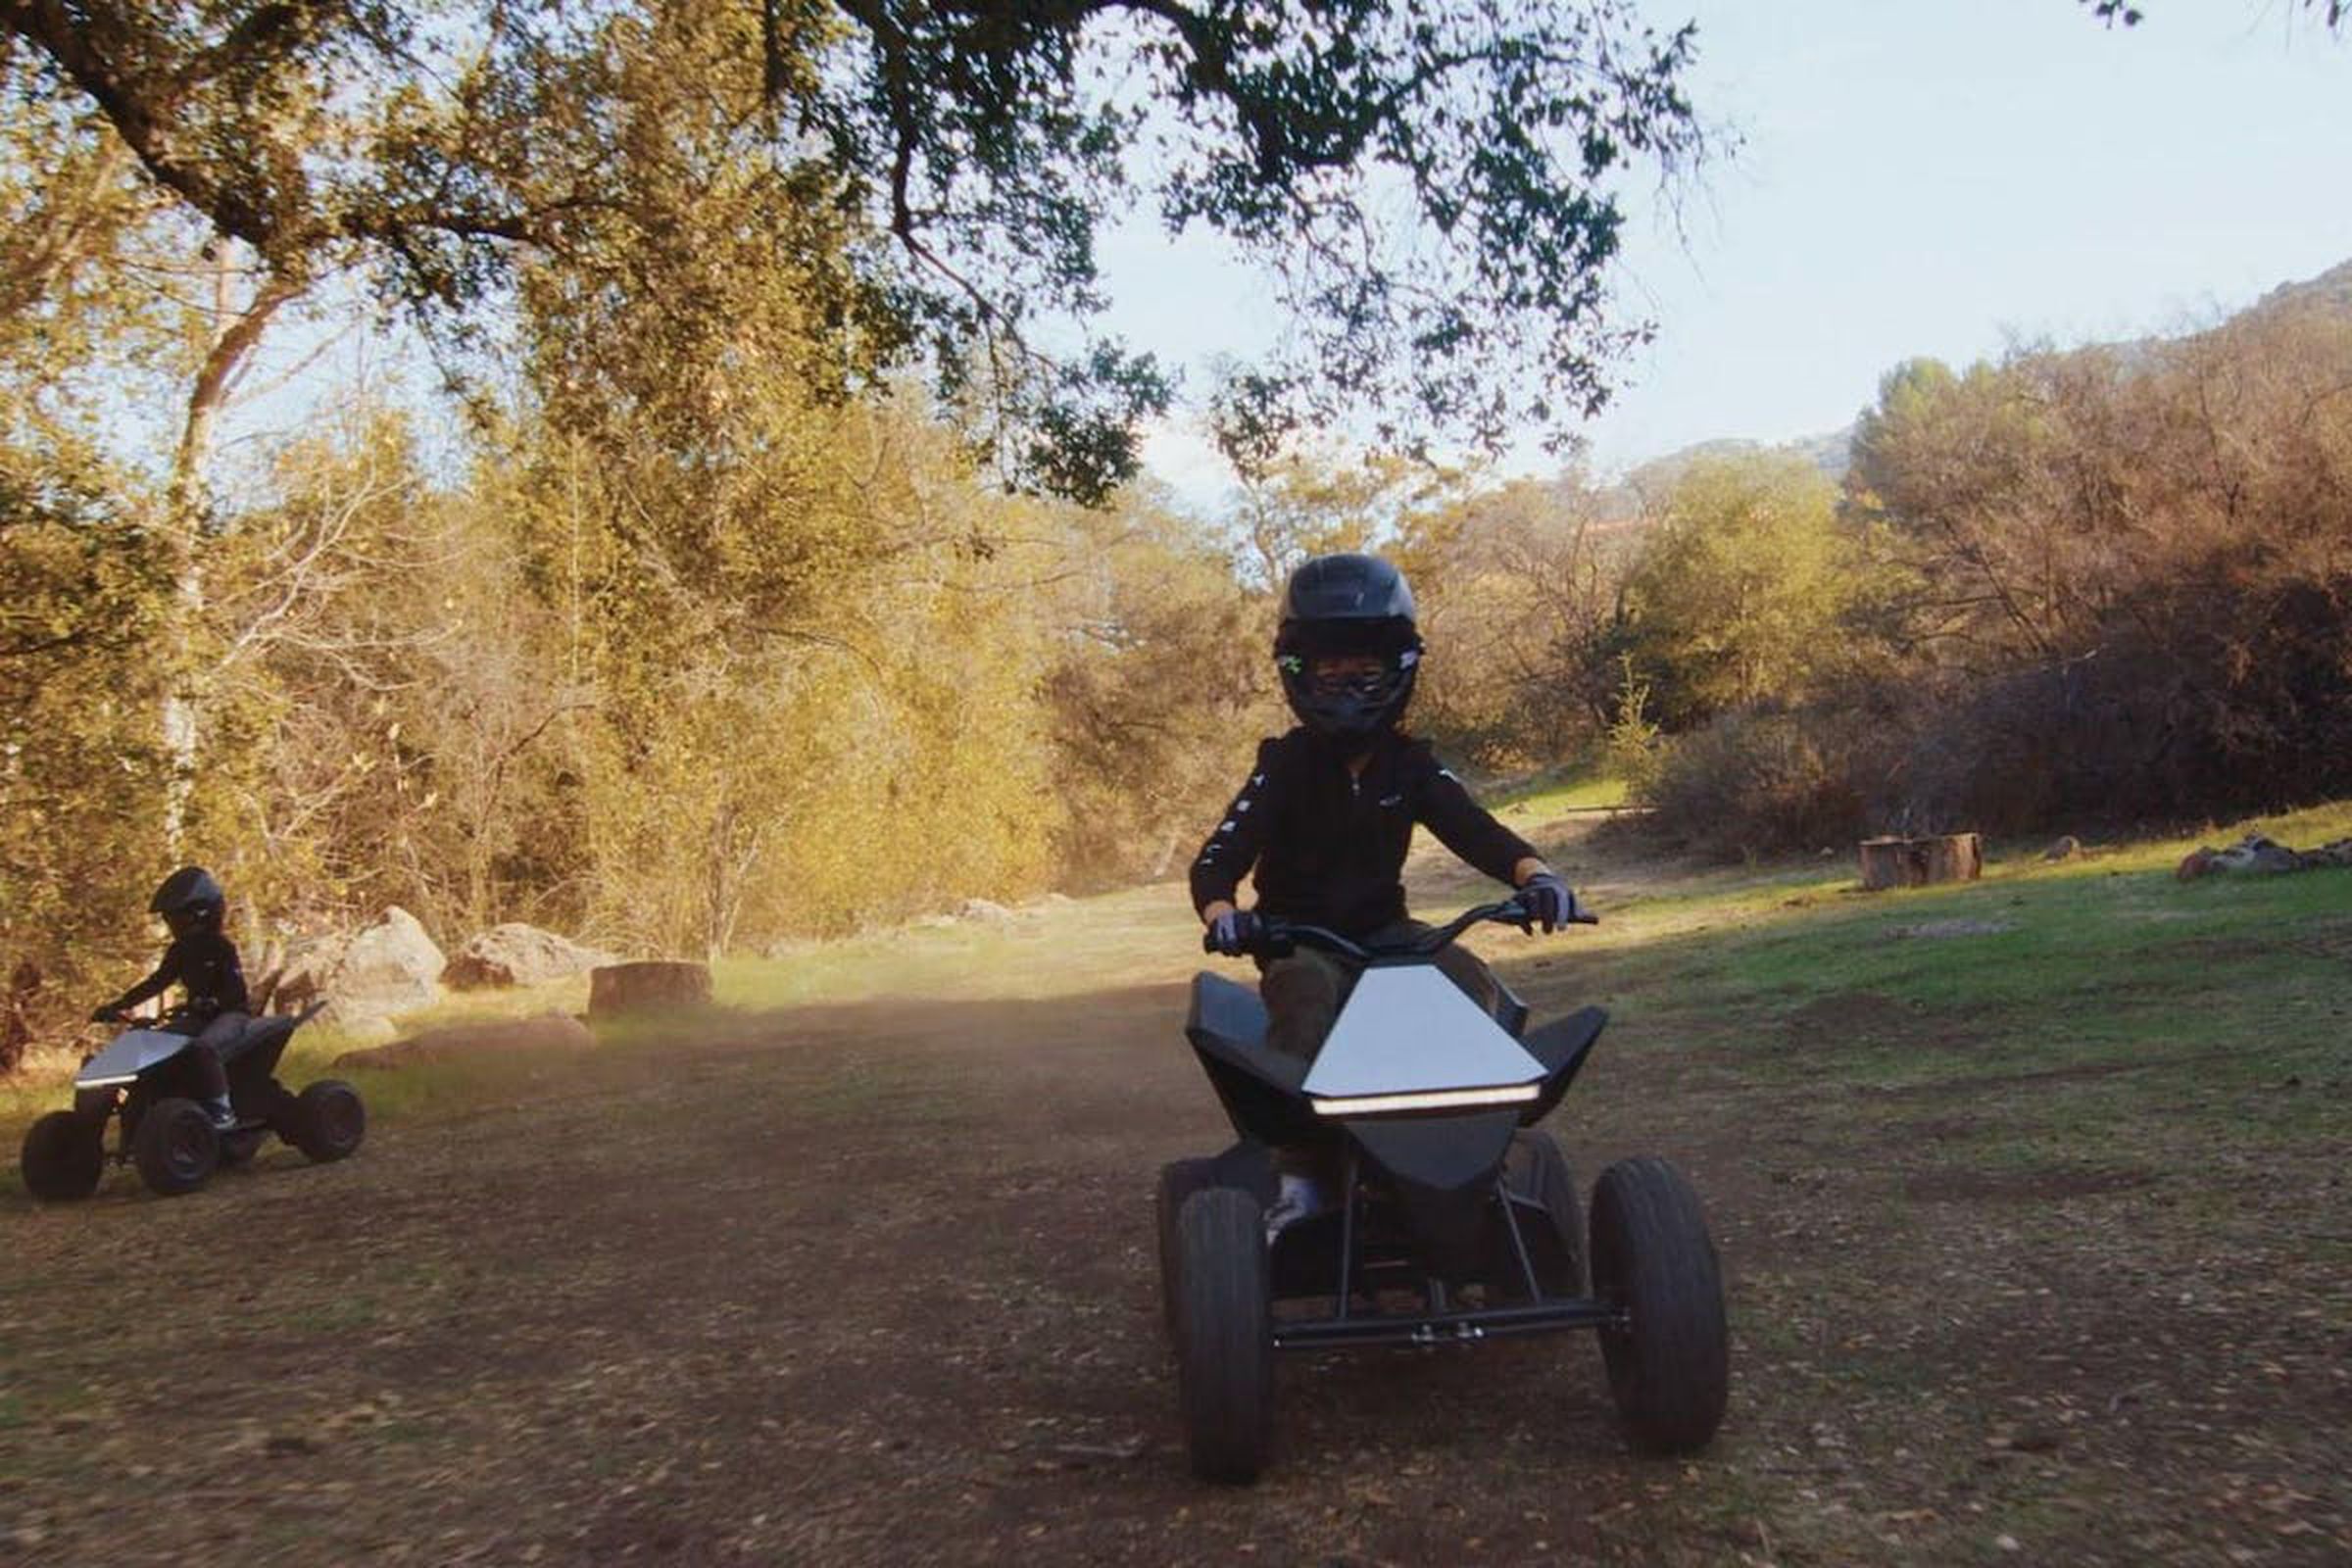 Photo of two kids in helmets riding the Cyberquad ATV.